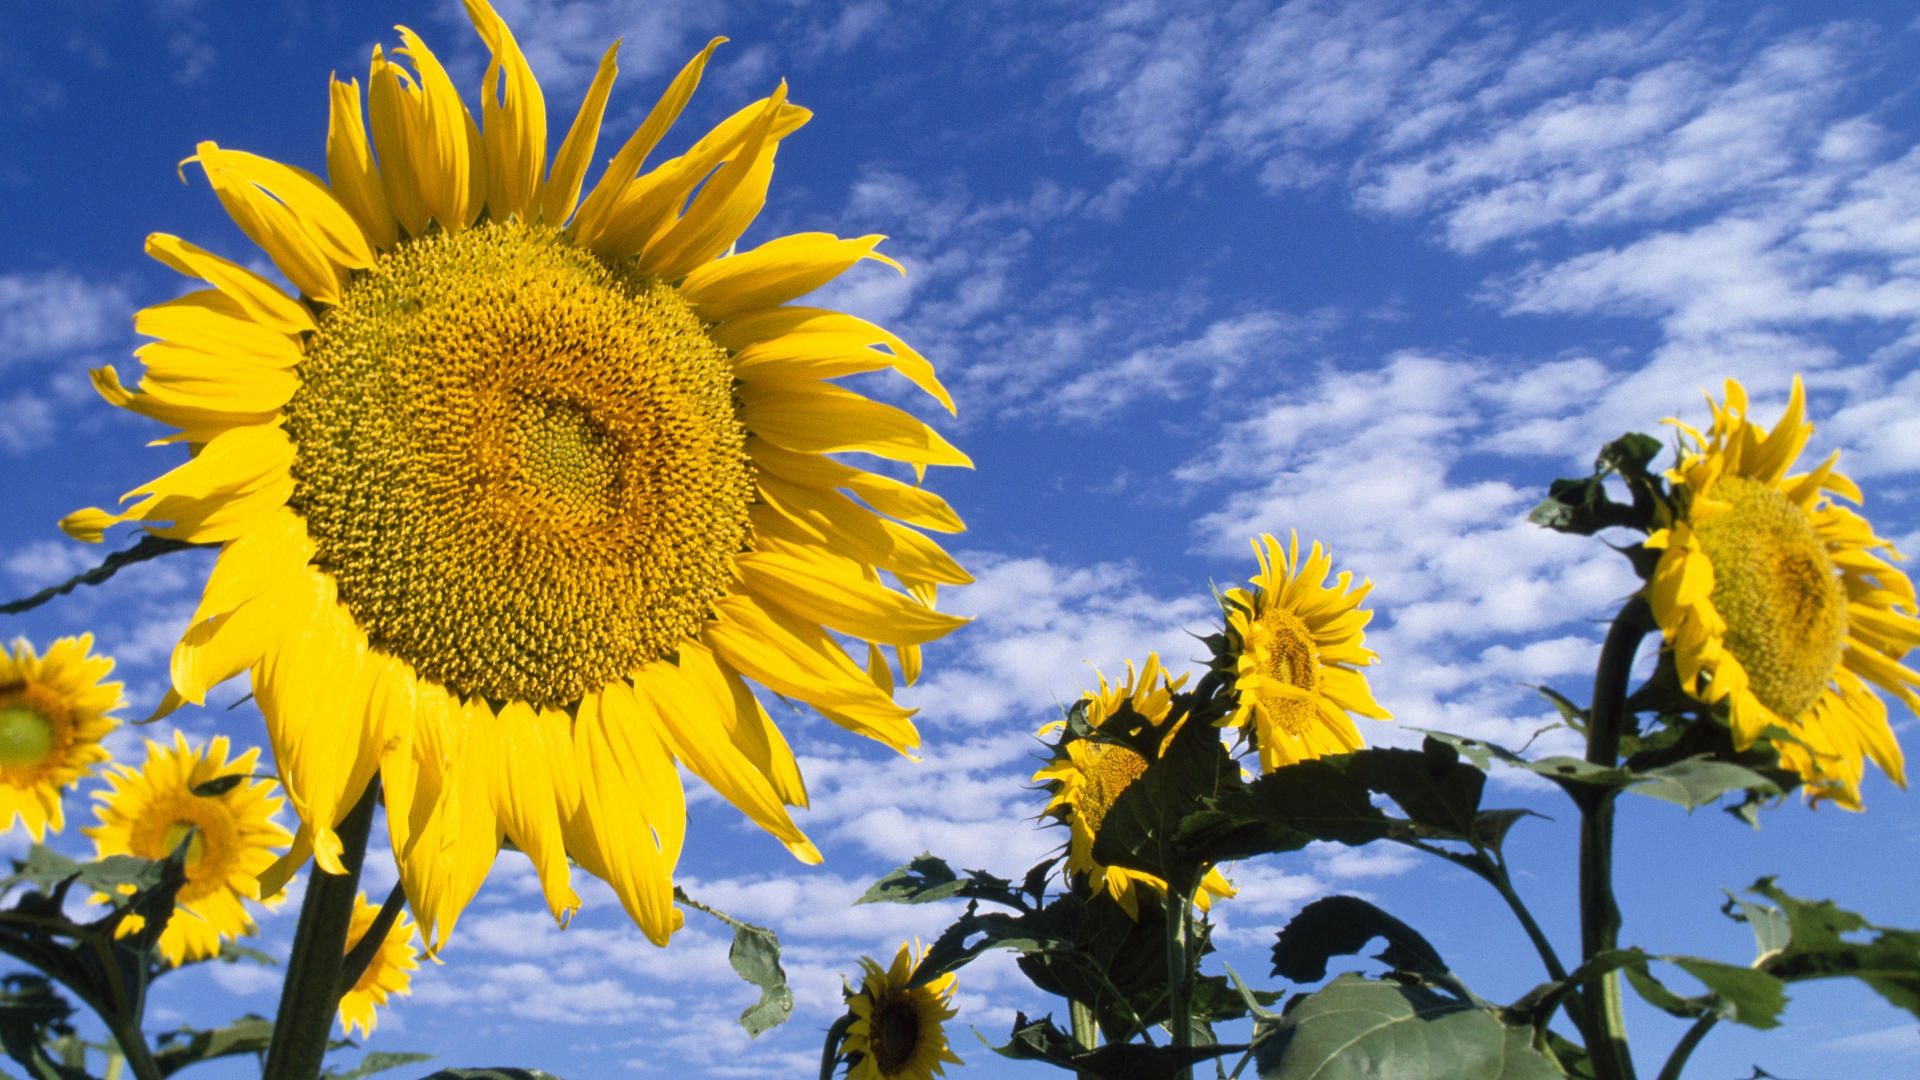 Download PC Wallpaper sunflowers, nature, flowers, sky, clouds, summer, field